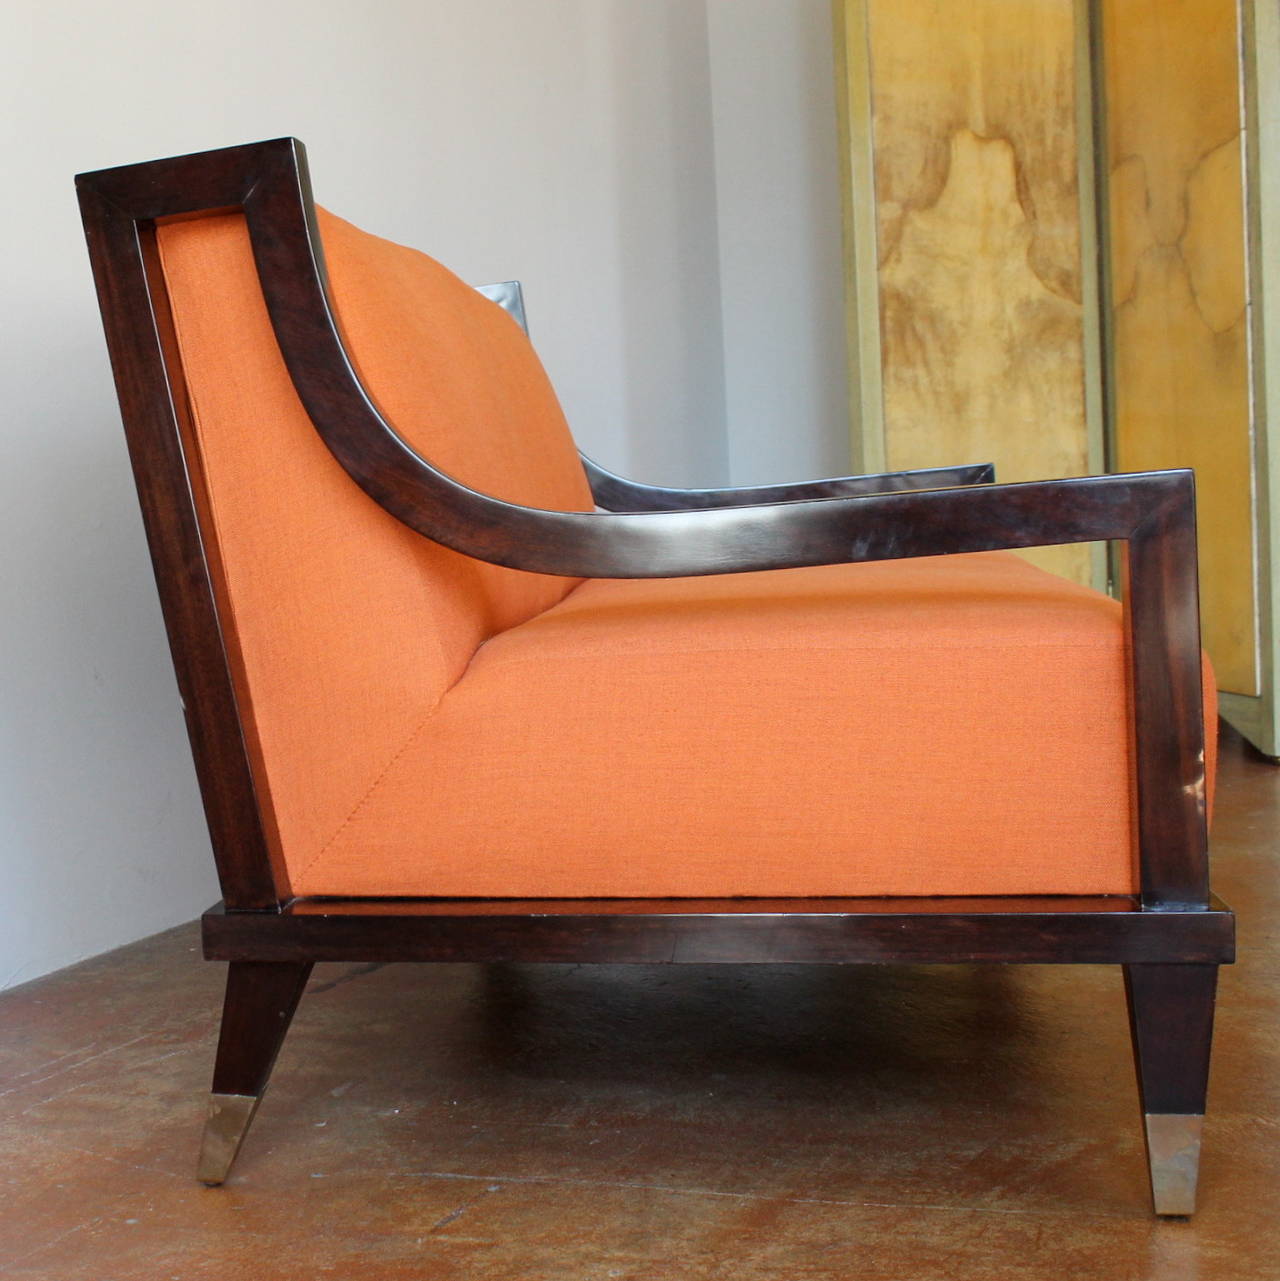 Mid-20th Century Exceptional and Documented Robert and Mito Block Settee or Sofa, Mexico, 1948 For Sale